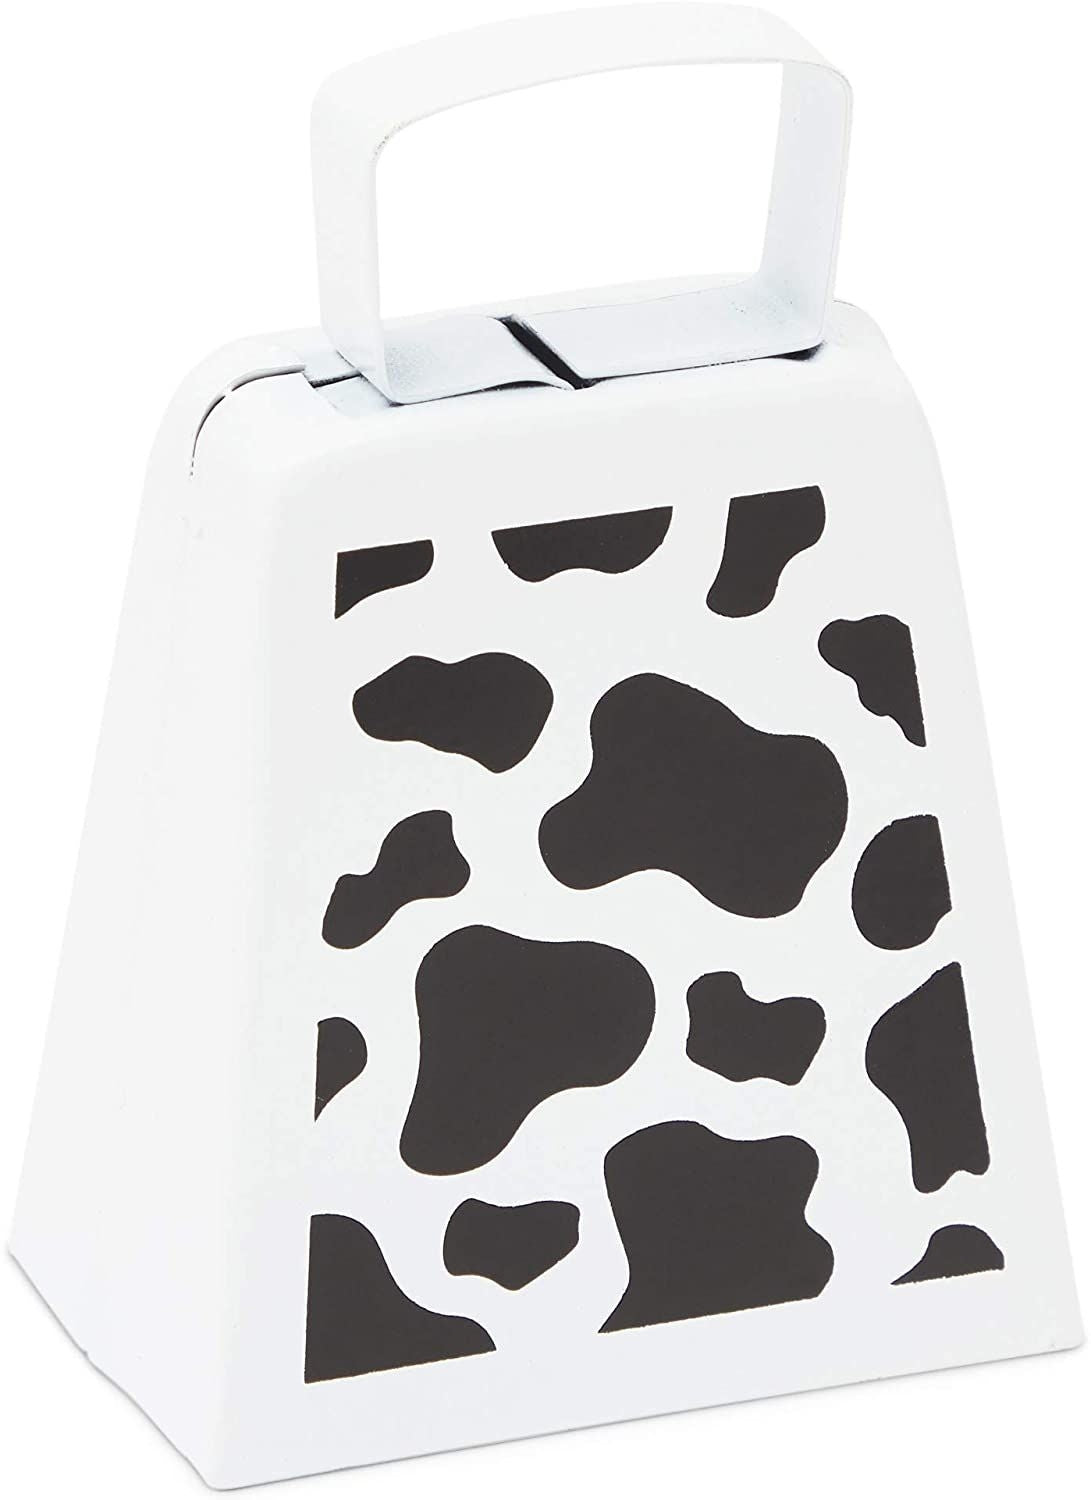 Small white cowbell with handle grip for weddings & cheer events